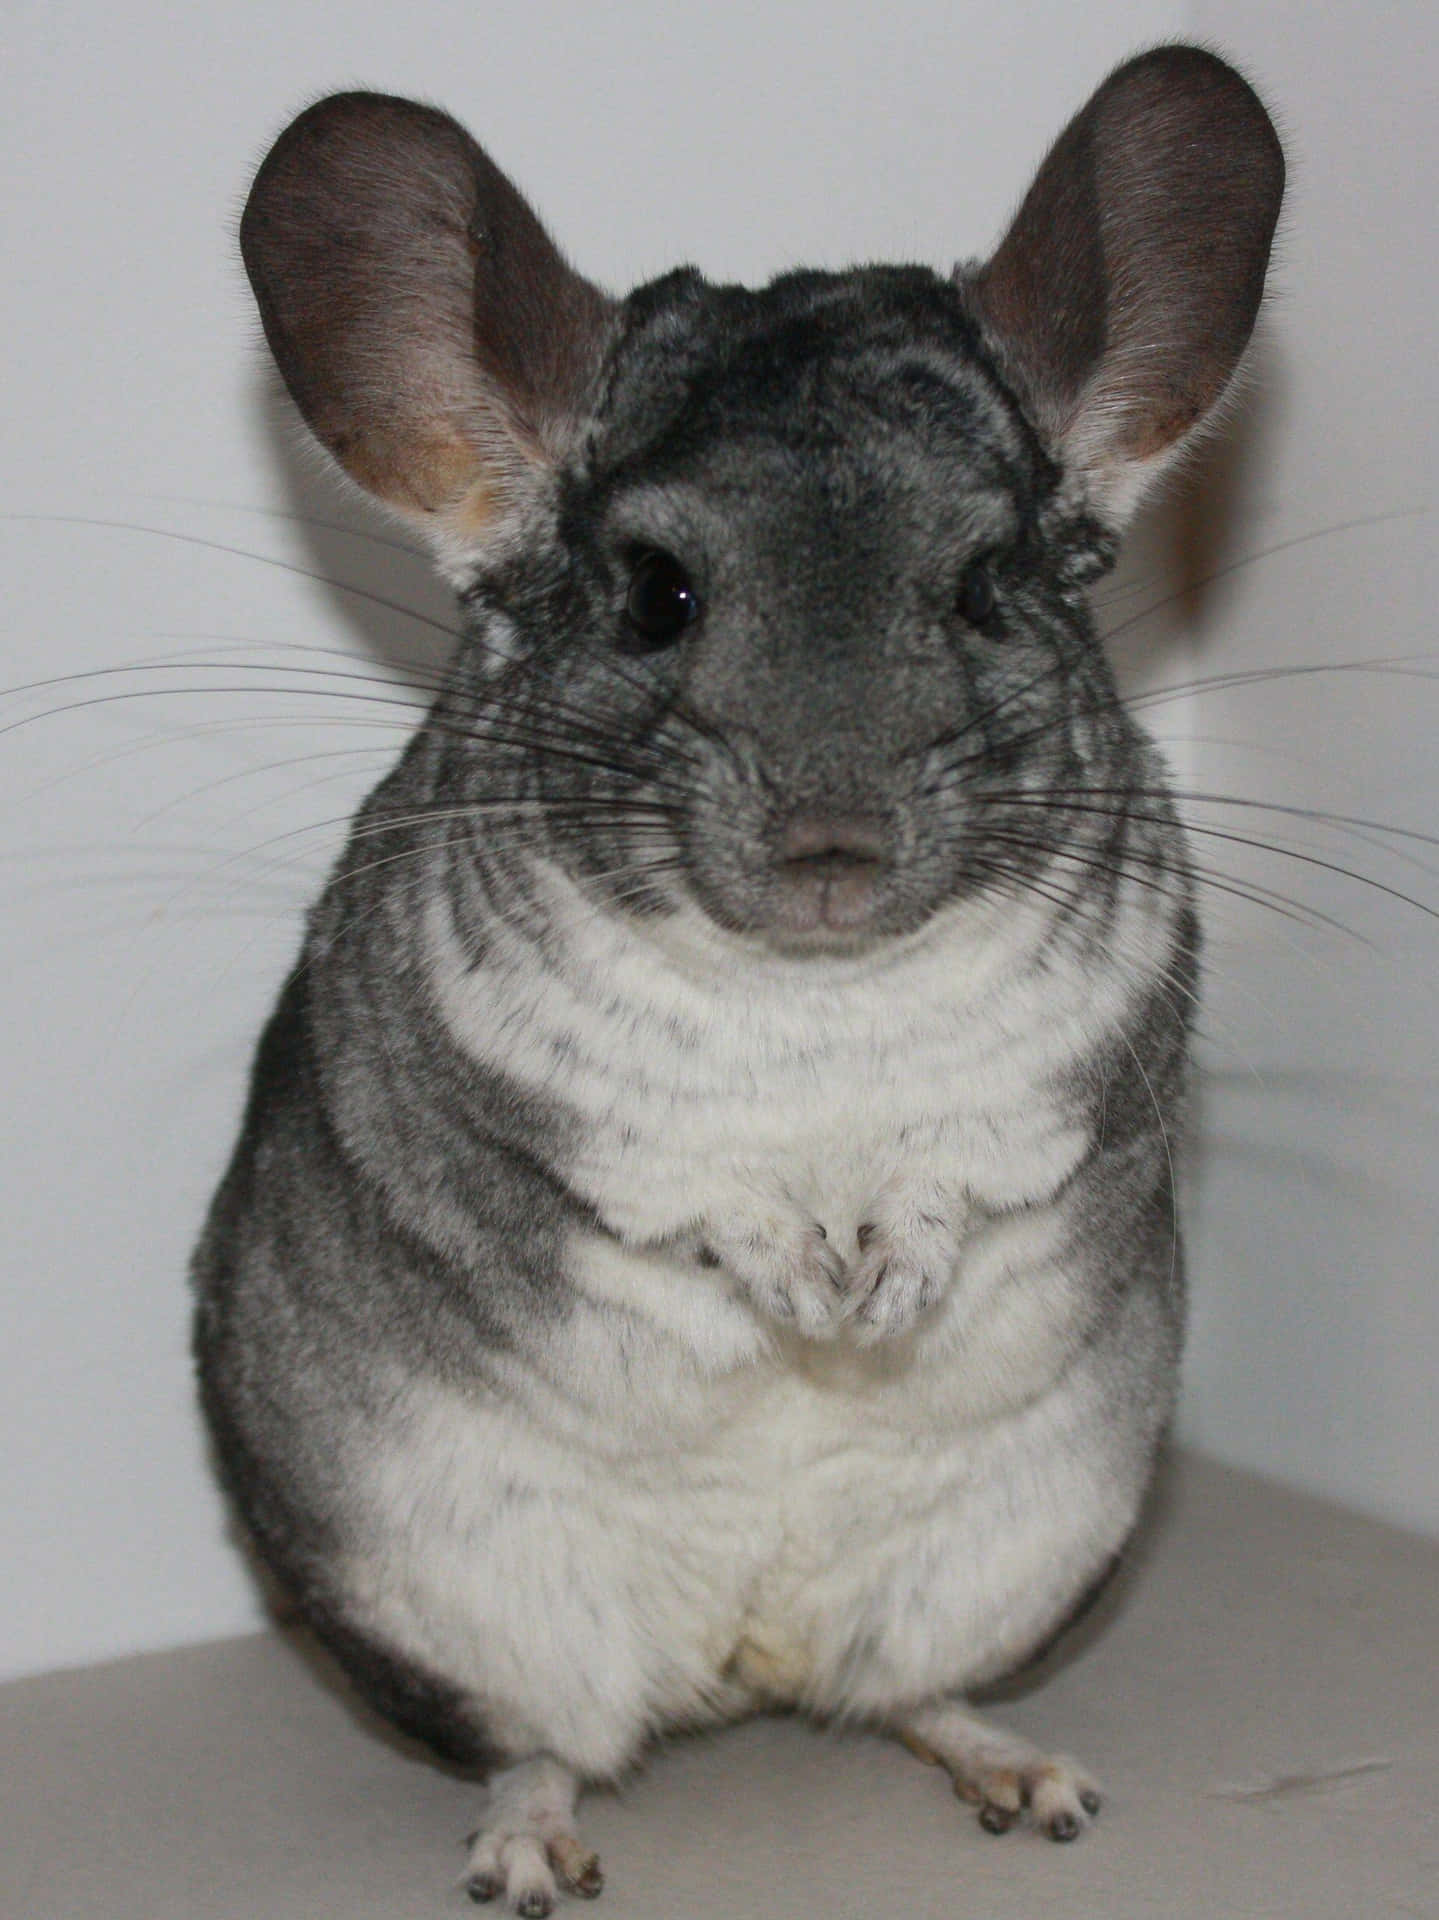 This cuddly chinchilla is just too cute!